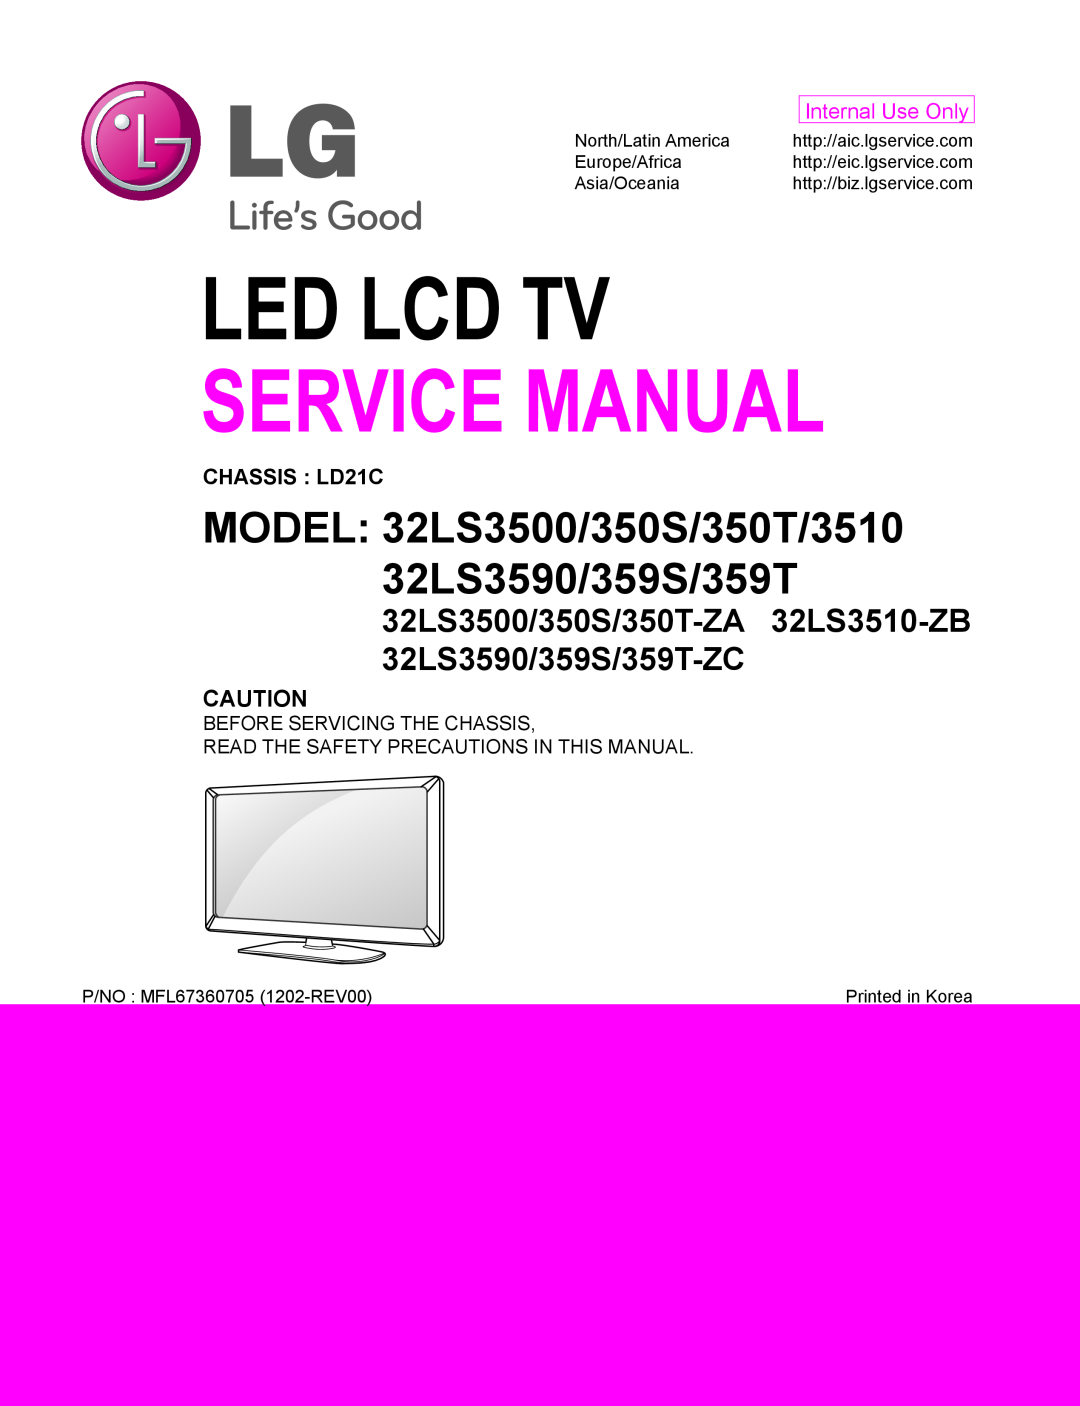 LG Electronics 32LS3500-ZA service manual CHASSIS LD21C, Led Lcd Tv, Service Manual, Internal Use Only, Europe/Africa 